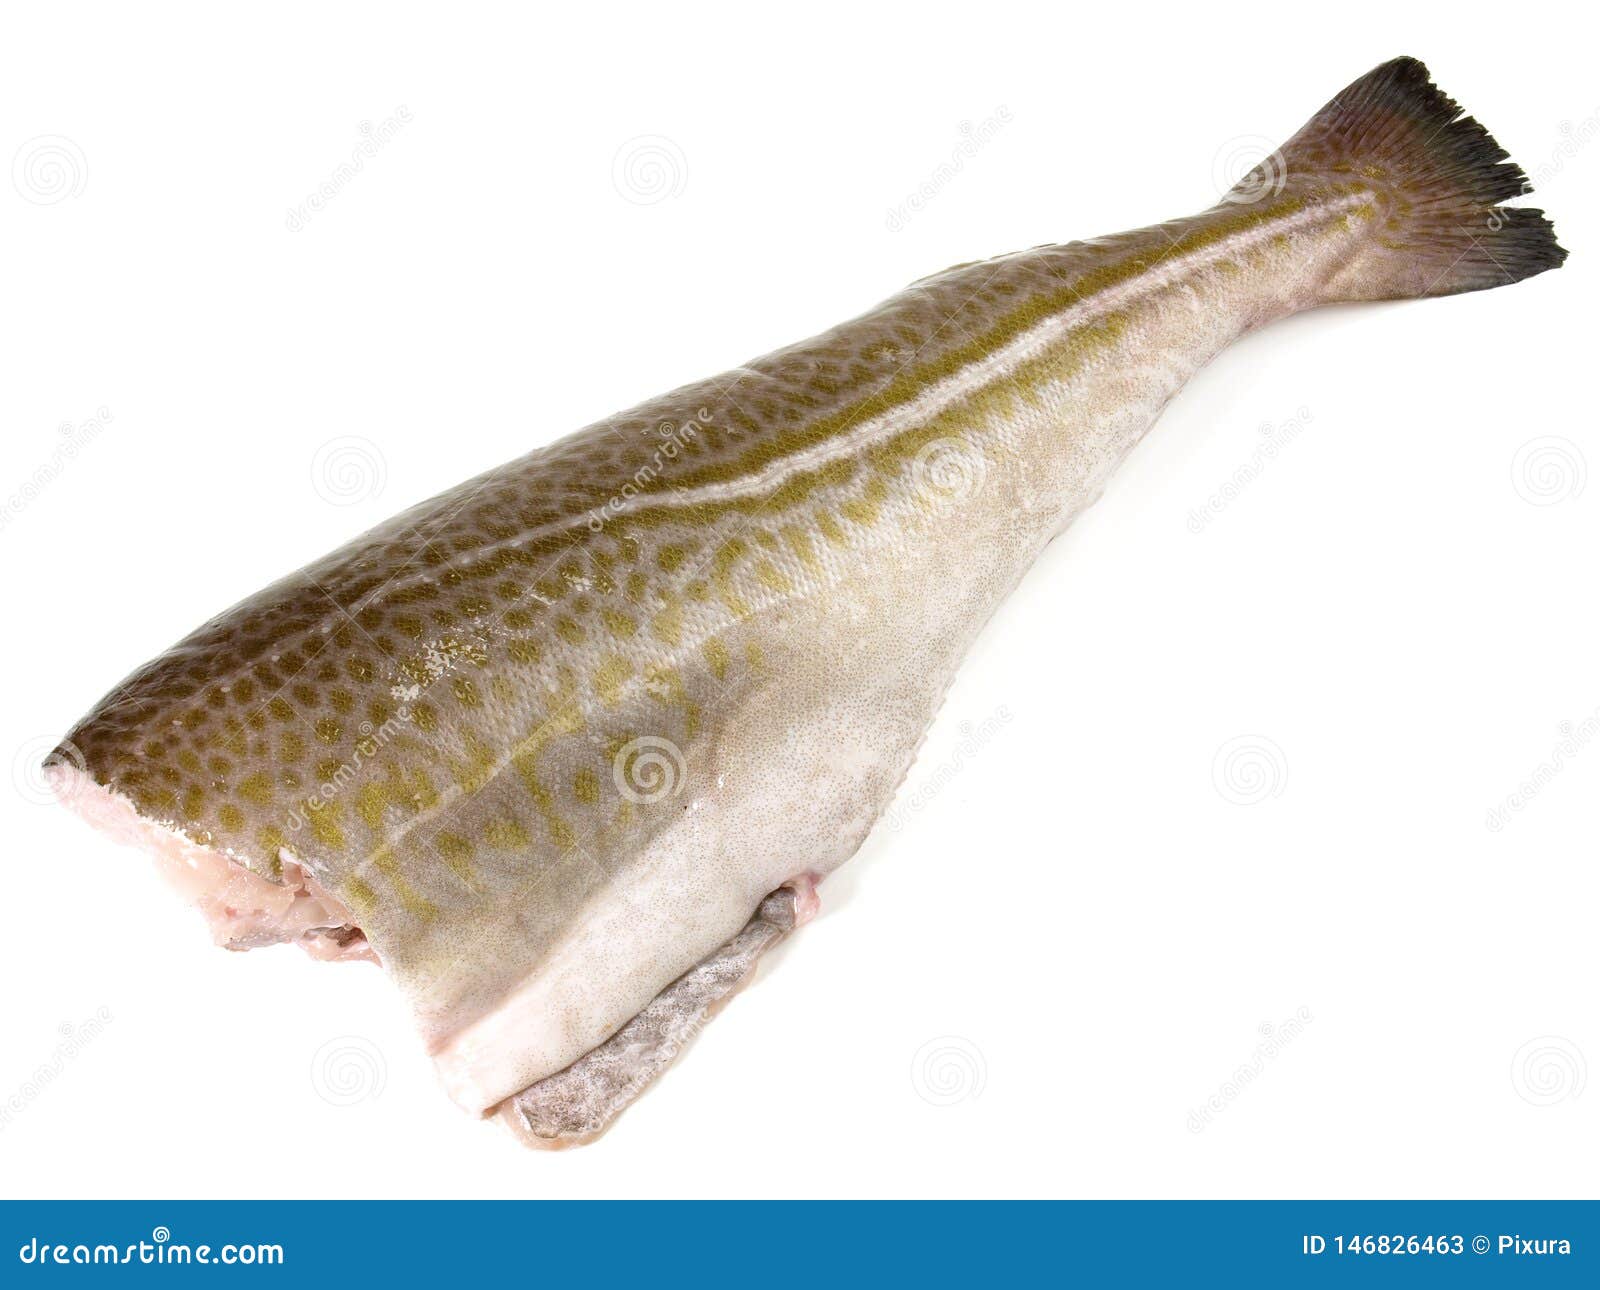 Cod Fish without Head stock image. Image of gourmet